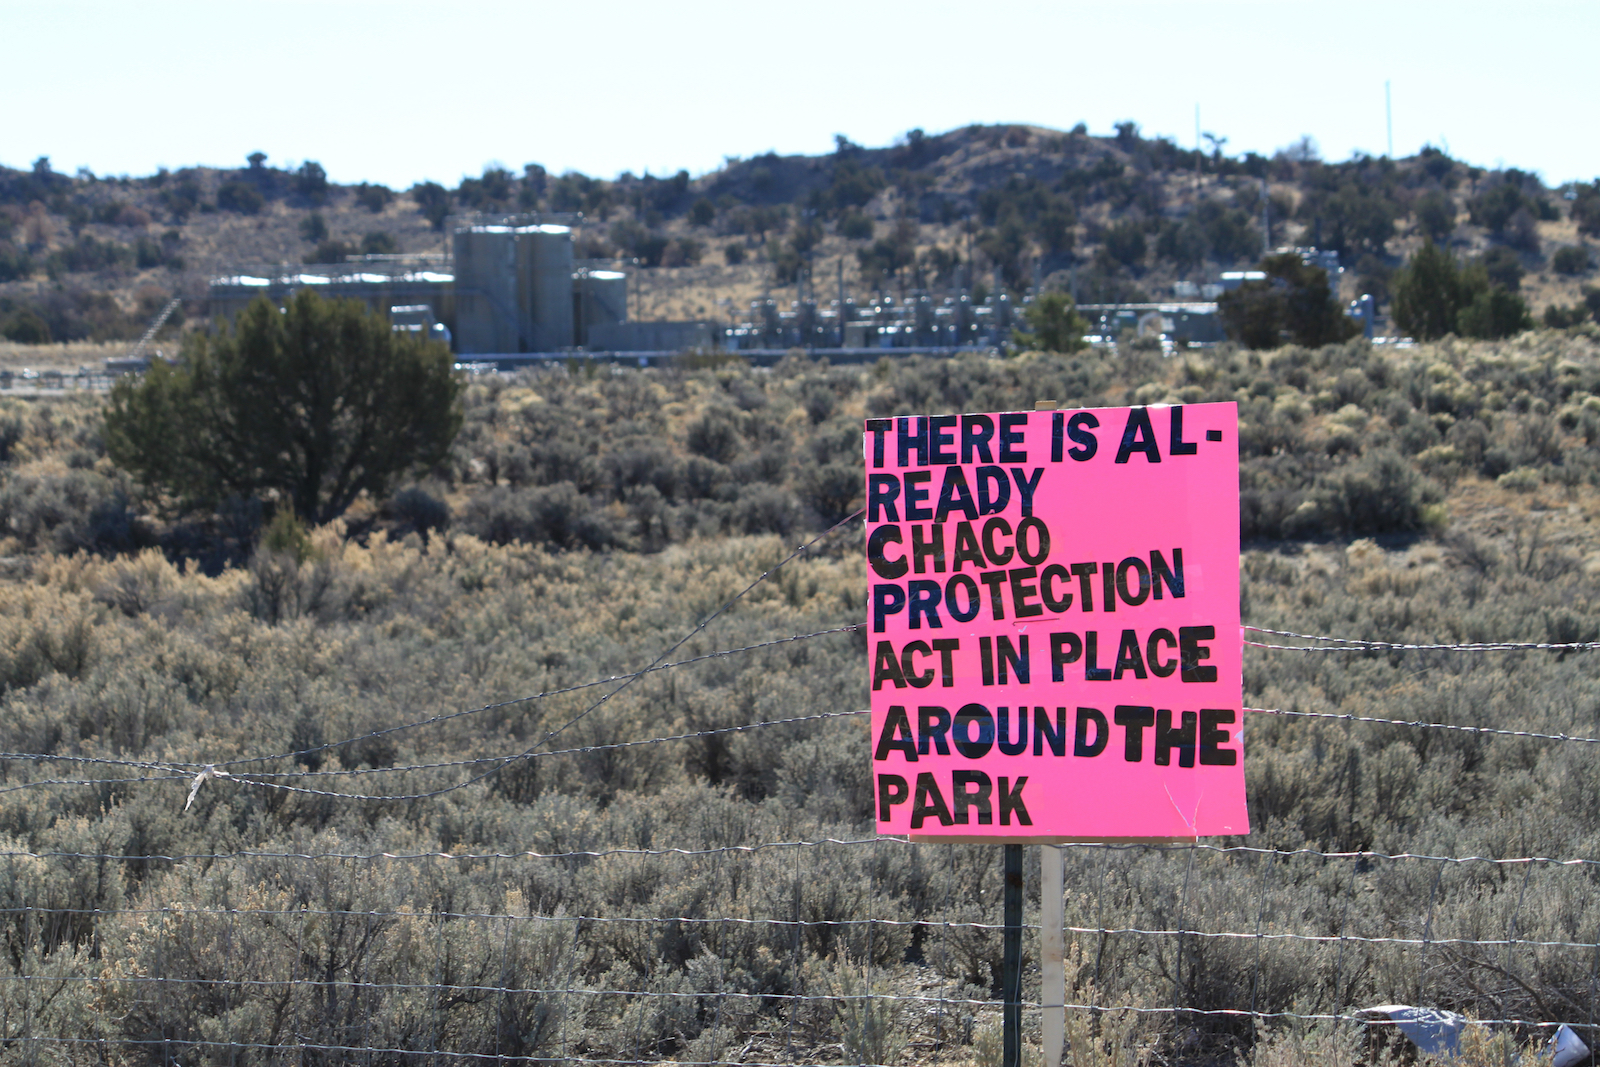 a pink sign says there is al-ready chaco protection act in place around the park